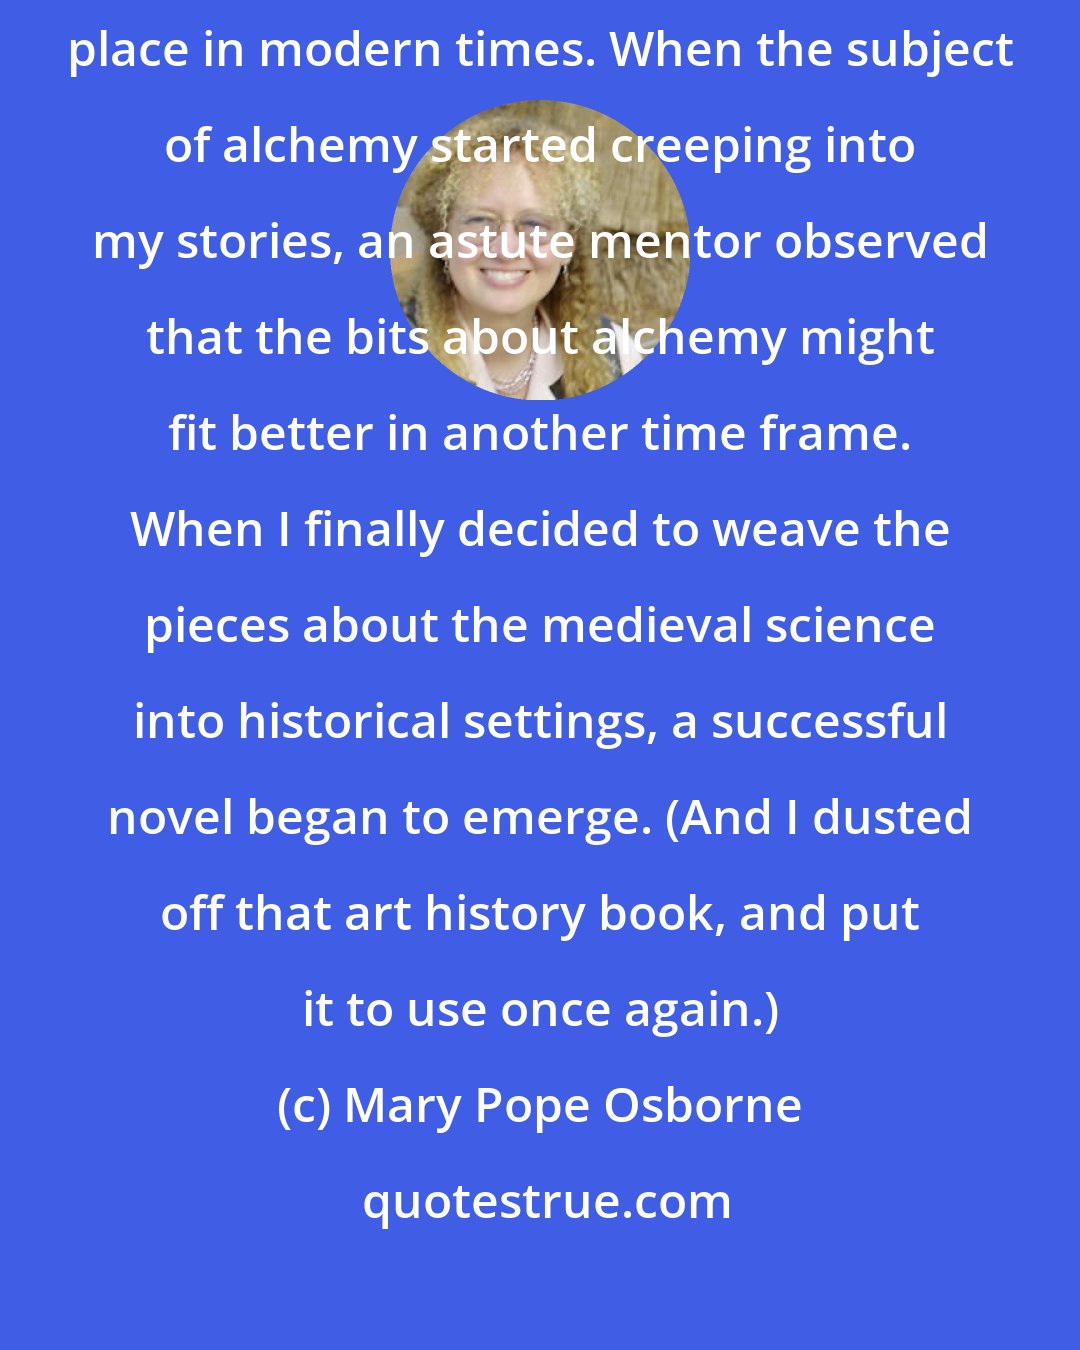 Mary Pope Osborne: While I was drawn to the Renaissance, my first (unpublished) novels took place in modern times. When the subject of alchemy started creeping into my stories, an astute mentor observed that the bits about alchemy might fit better in another time frame. When I finally decided to weave the pieces about the medieval science into historical settings, a successful novel began to emerge. (And I dusted off that art history book, and put it to use once again.)